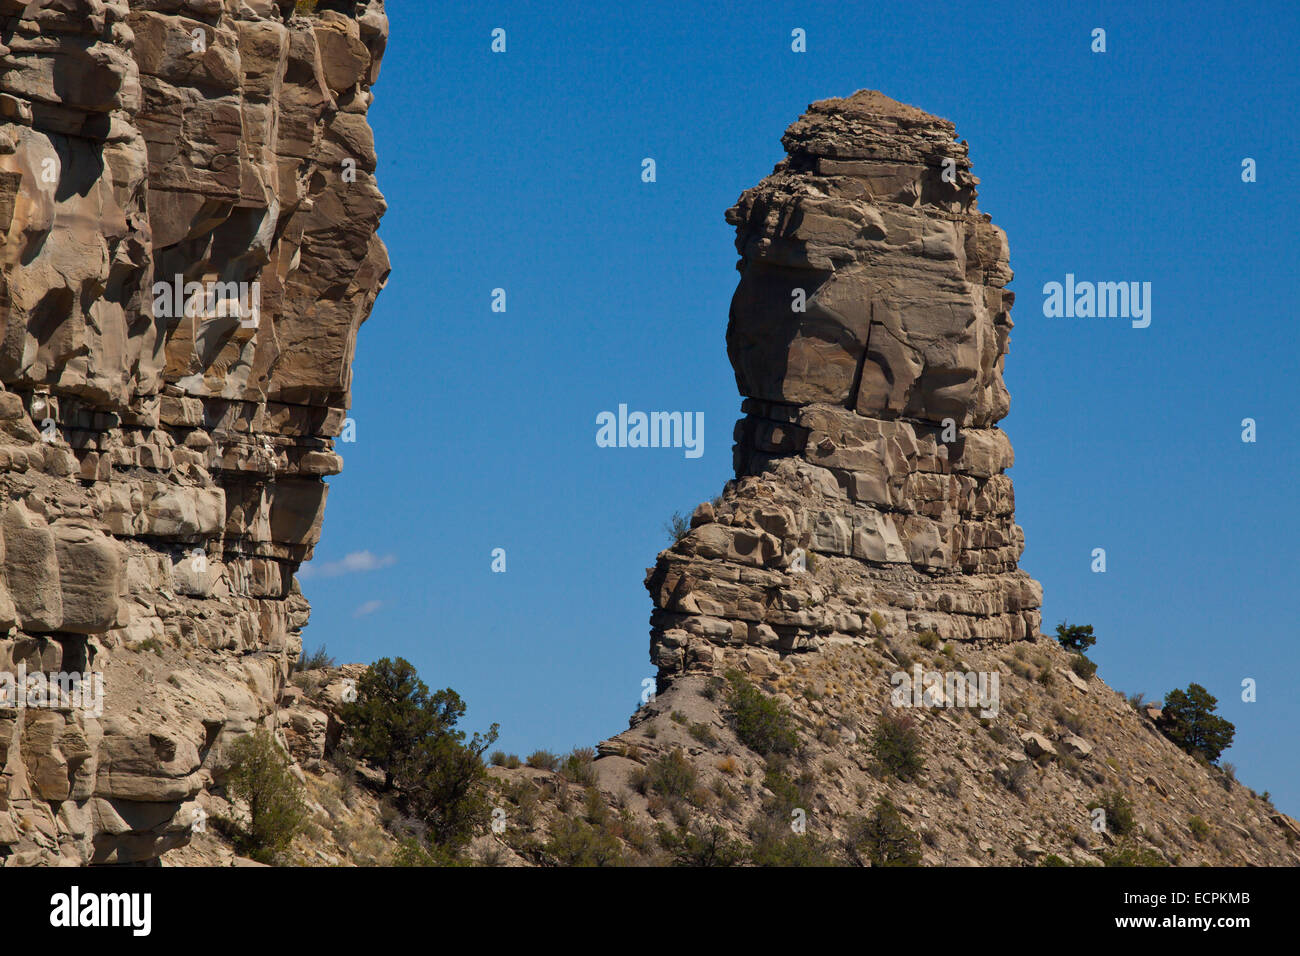 A view of the two pinnacles at CHIMNEY ROCK NATIONAL MONUMENT - SOUTHERN COLORADO Stock Photo